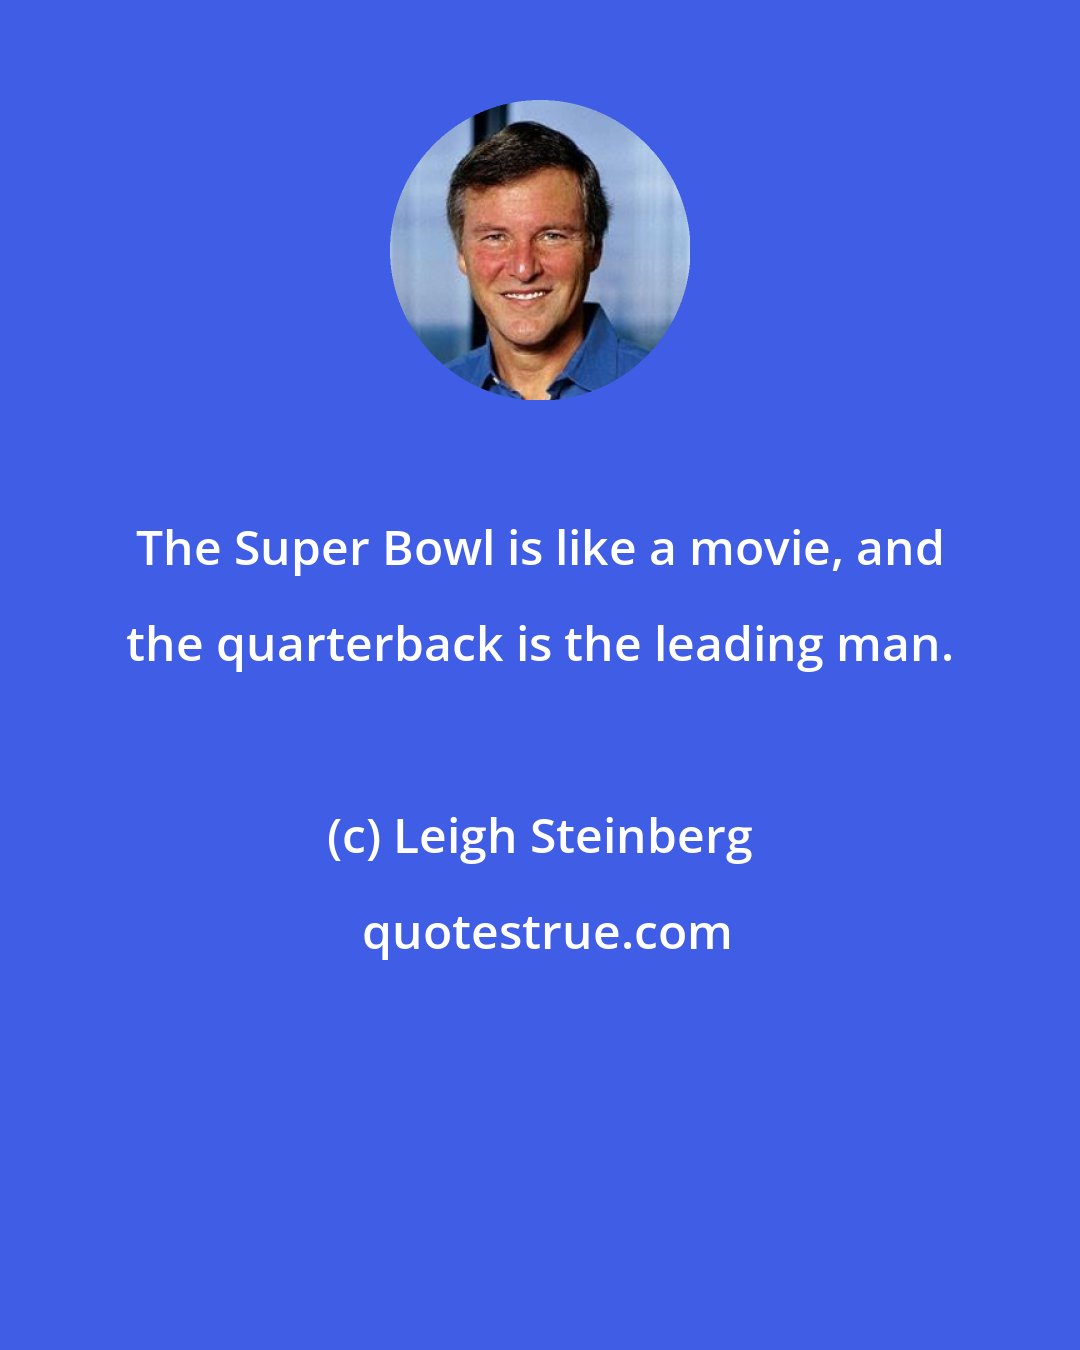 Leigh Steinberg: The Super Bowl is like a movie, and the quarterback is the leading man.